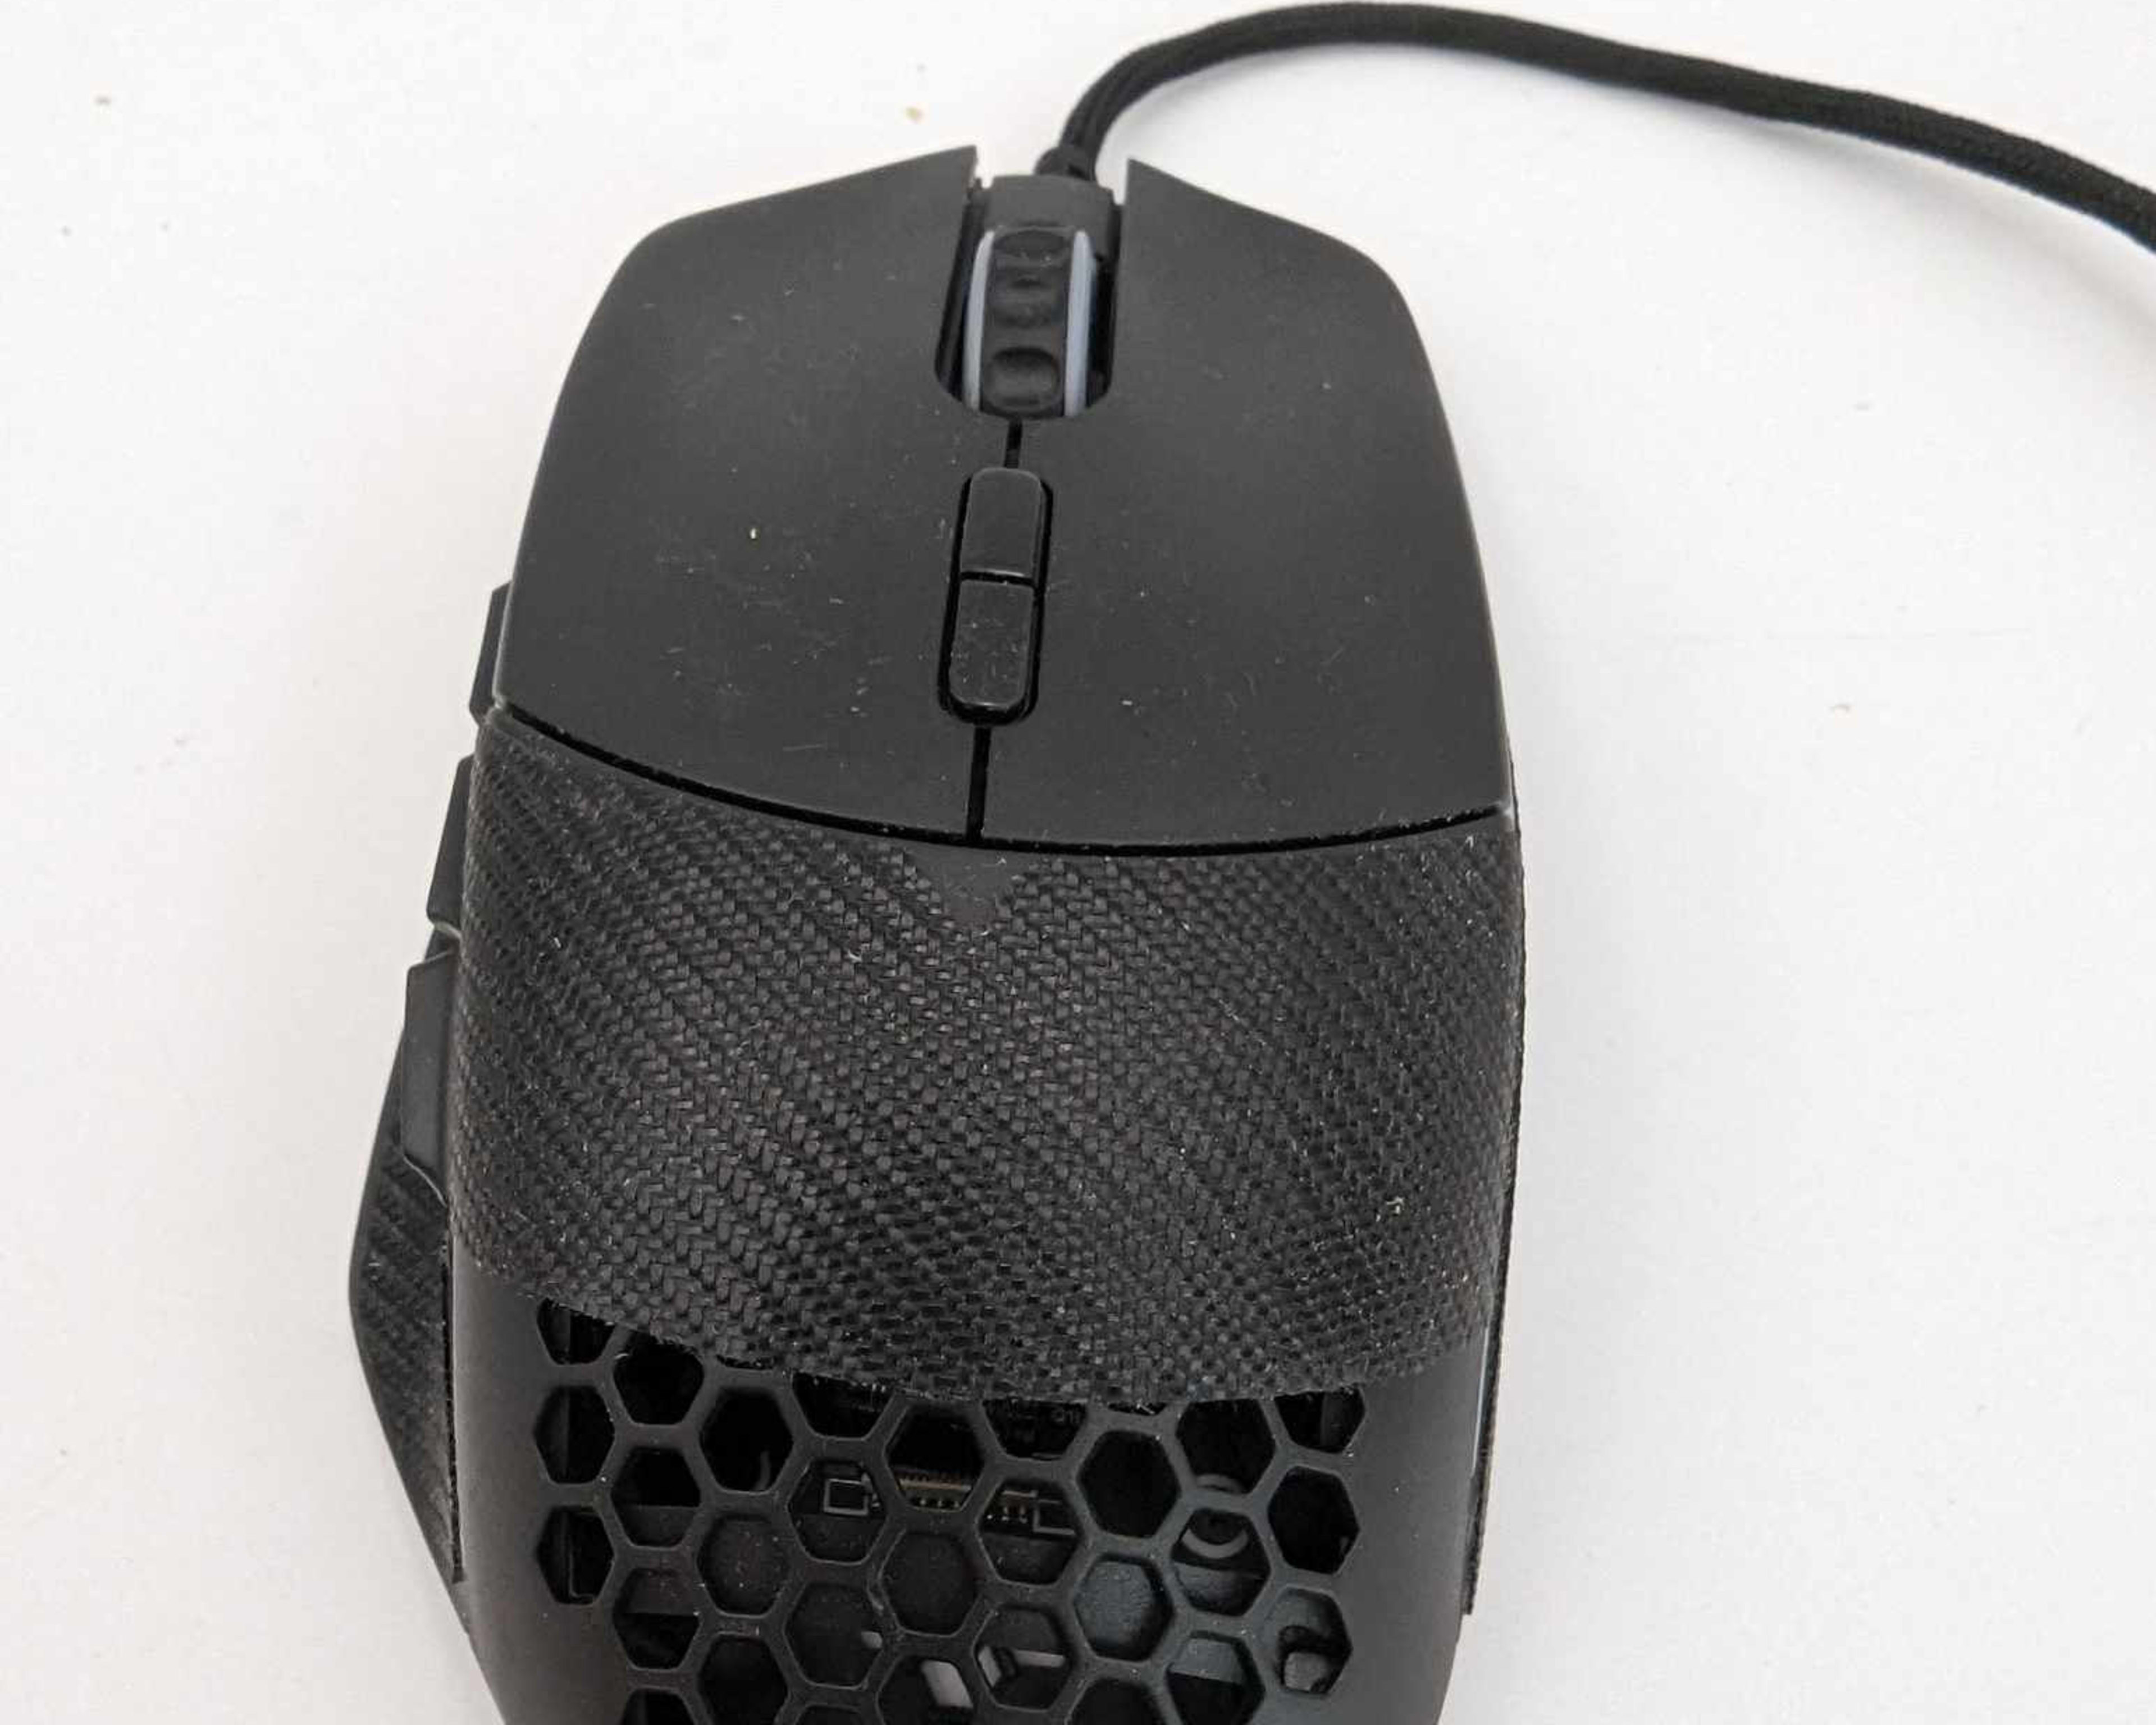 Glorious Model I Ultralight Wired Gaming Mouse